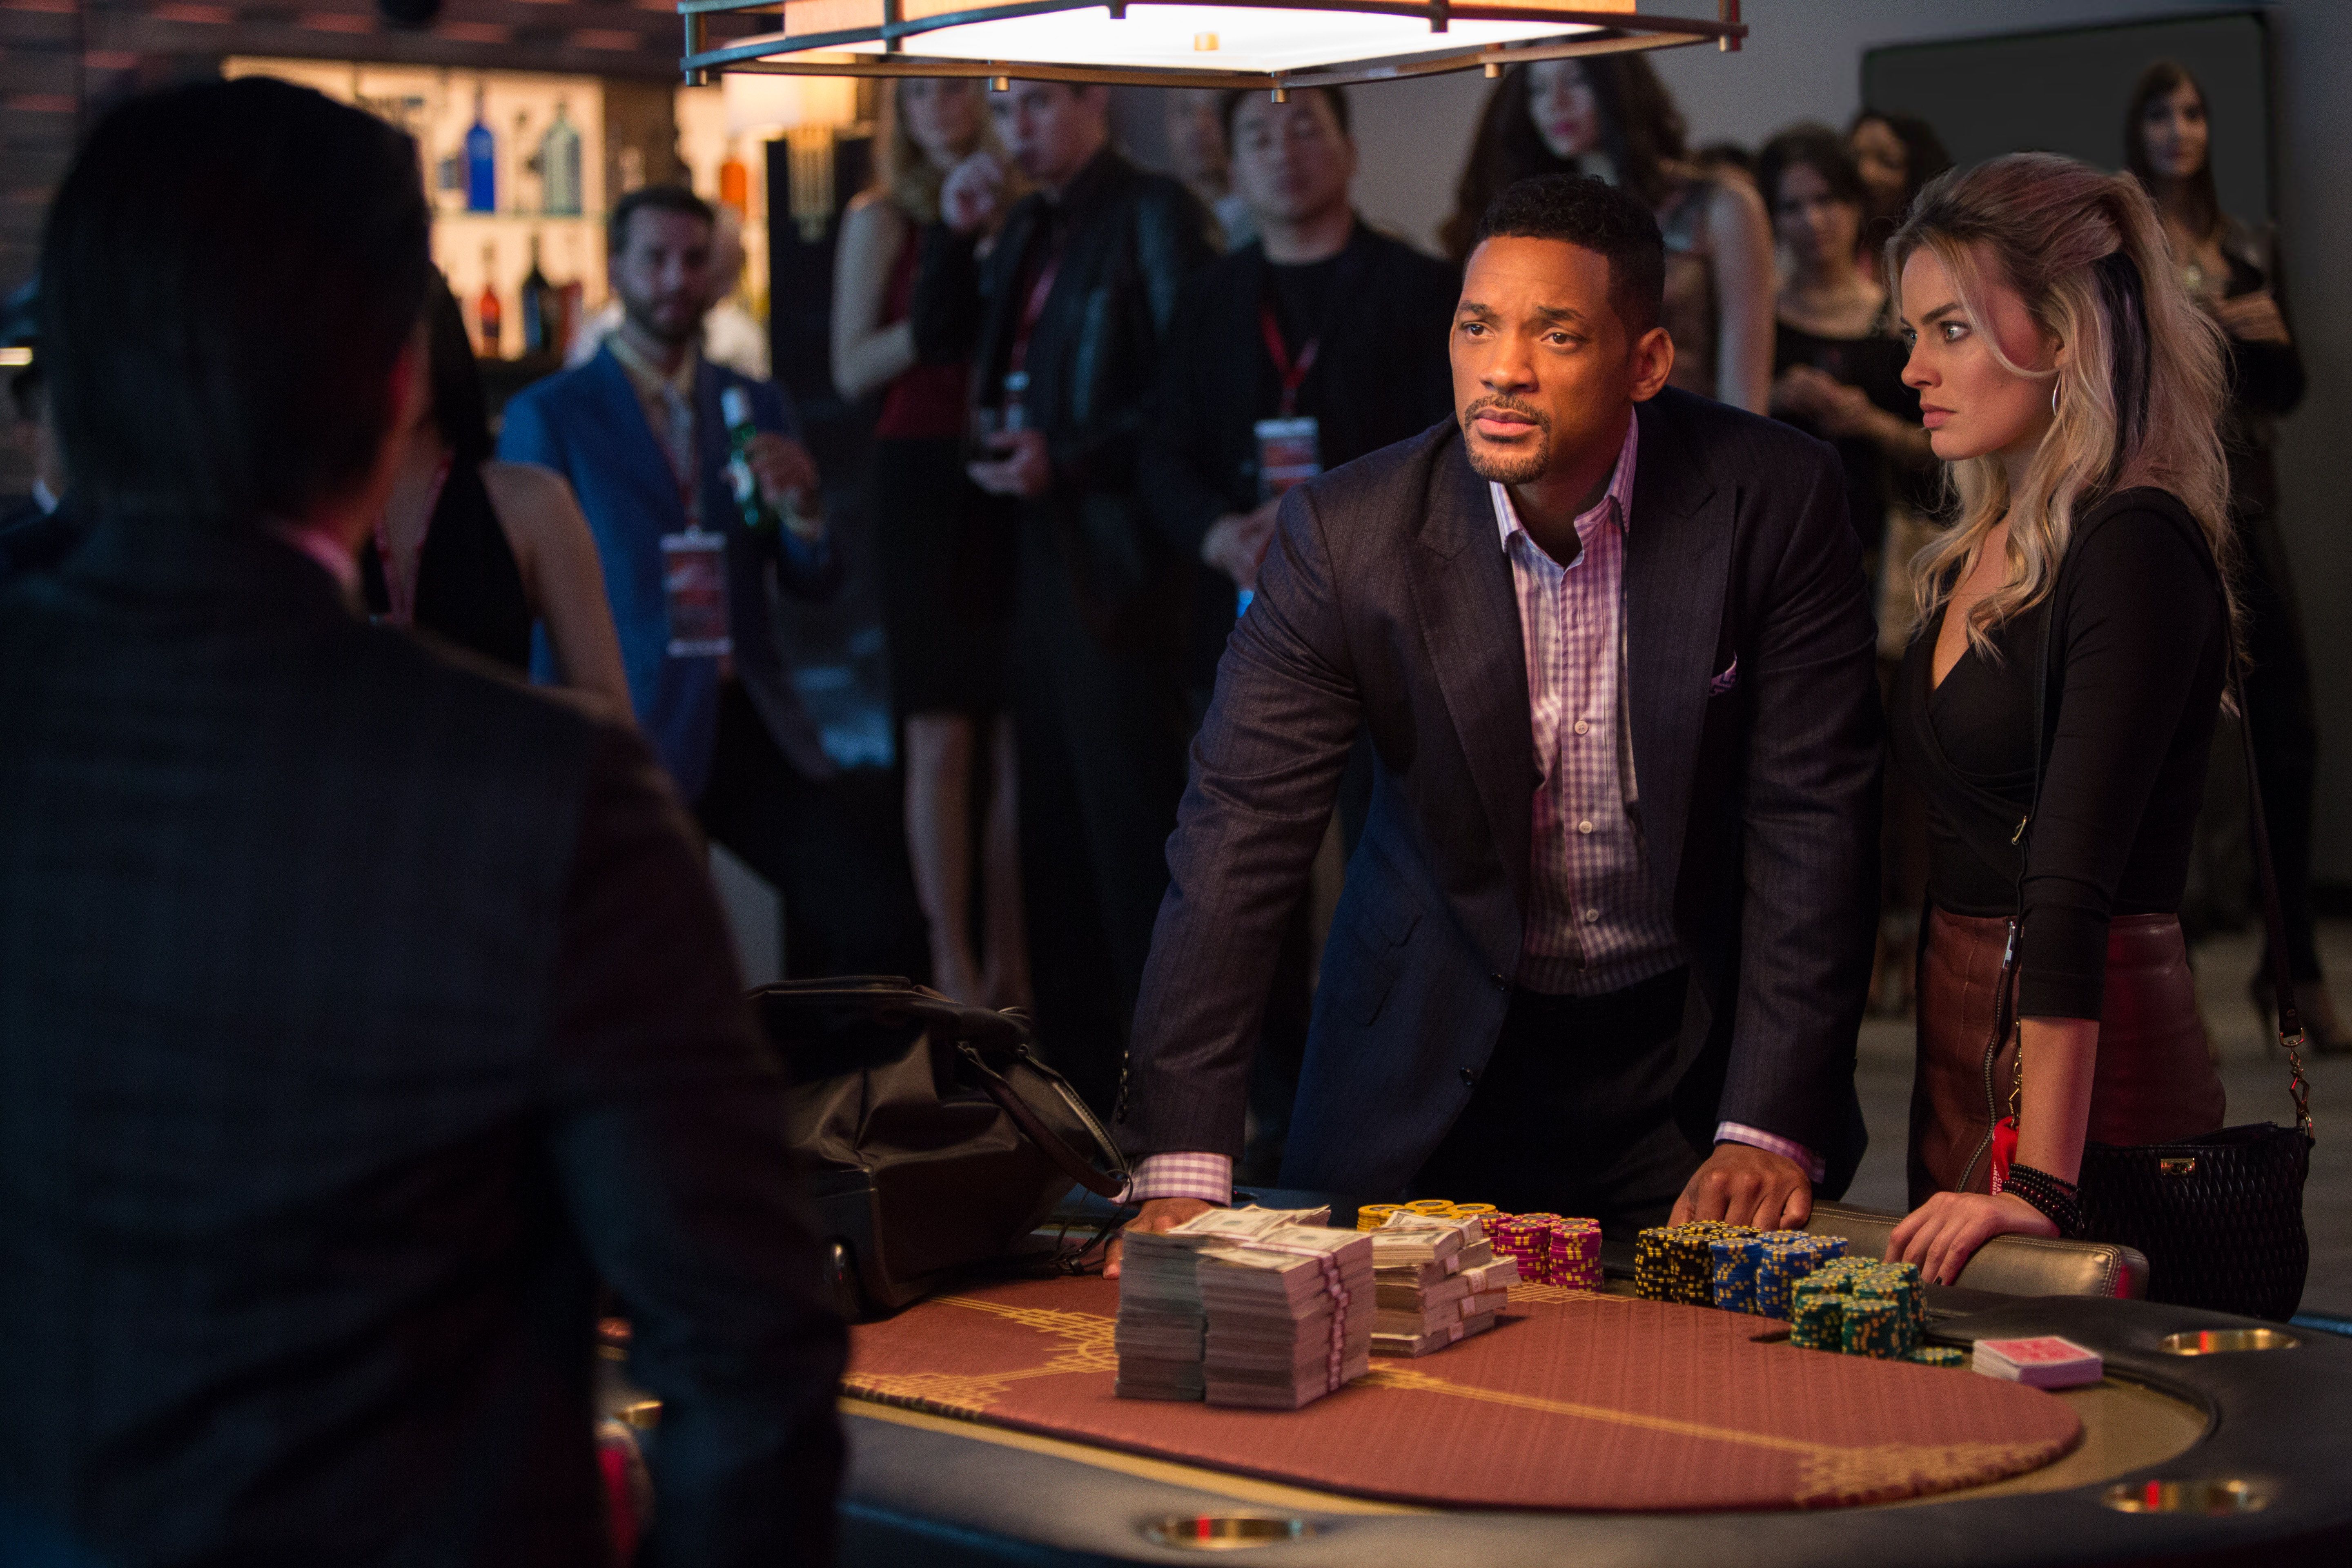 'Focus' Clips and Behind-the-Scenes Footage Starring Will Smith and Margot Robbie ...5760 x 3840